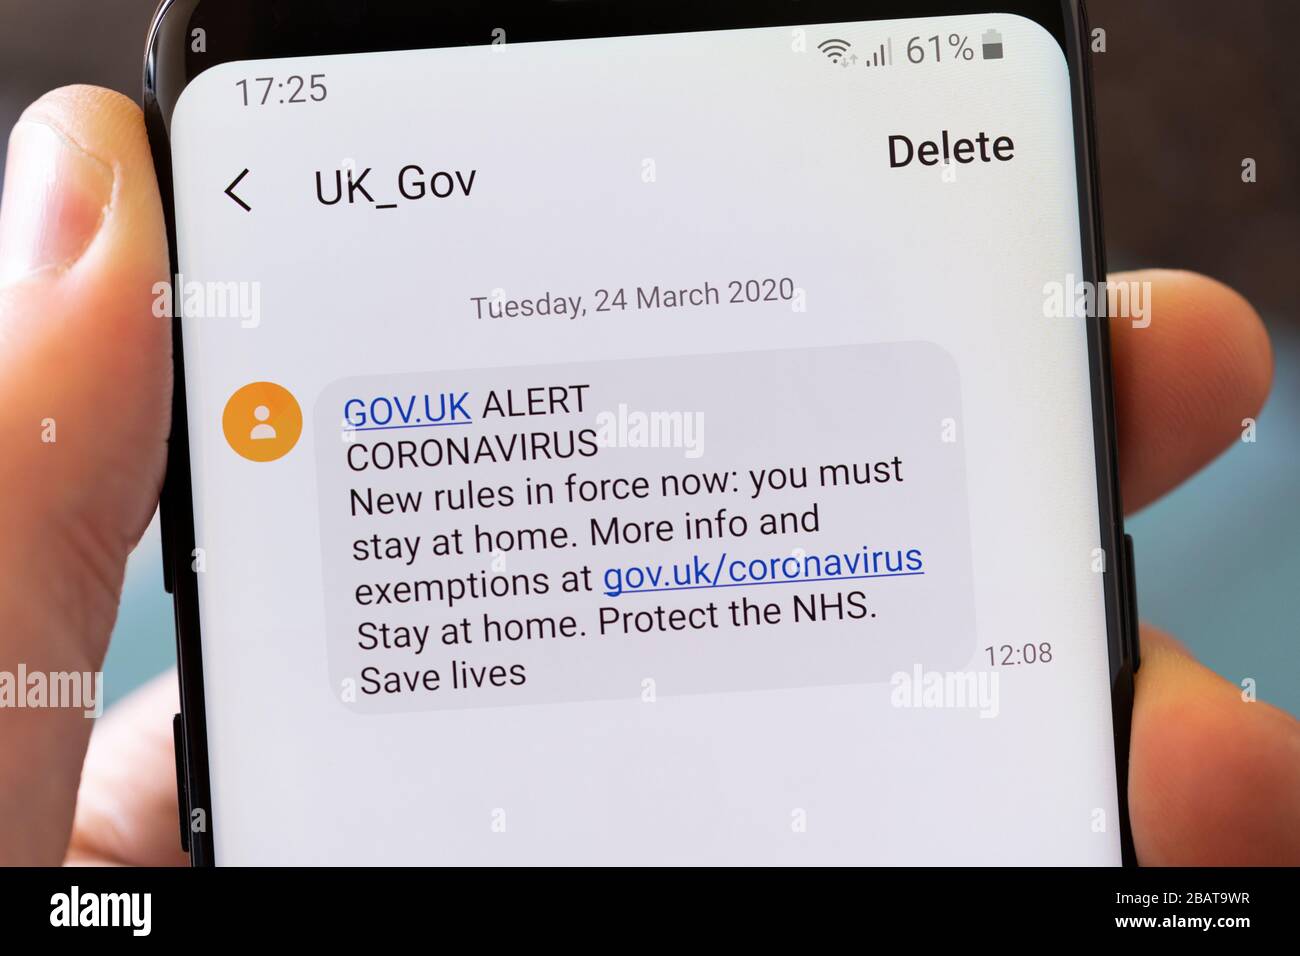 Official text message from the UK Government telling people to stay at home, protect the NHS and save lives during the Coronavirus Covid 19 epidemic Stock Photo